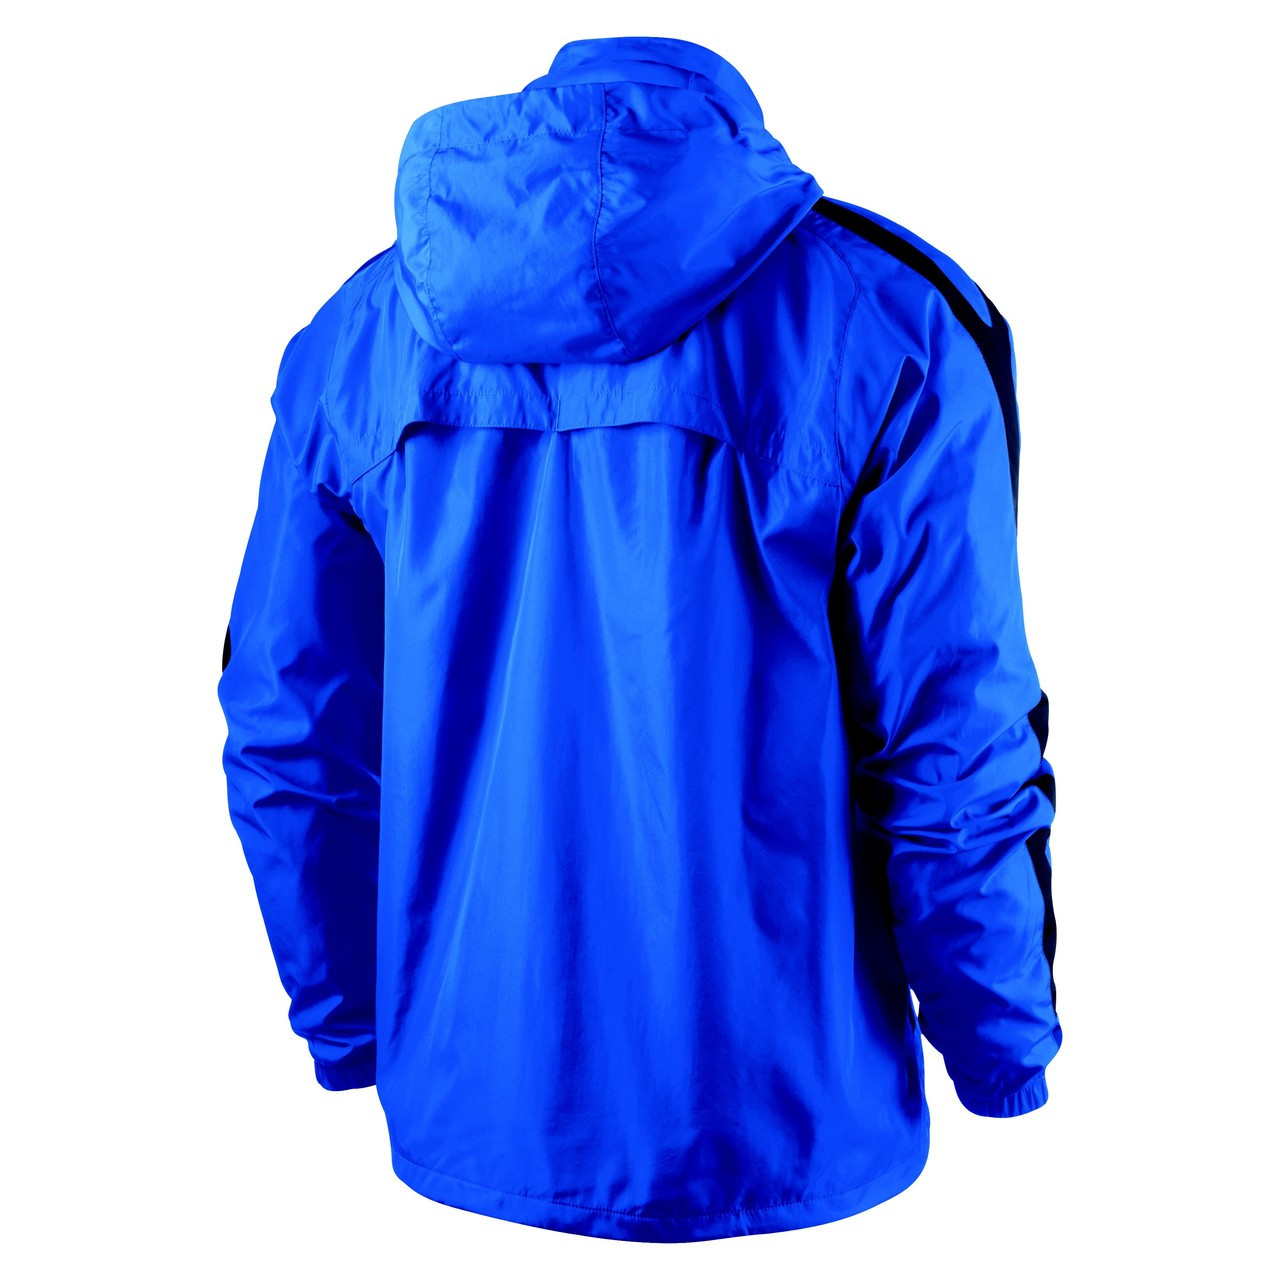 nike storm fit jacket with hood